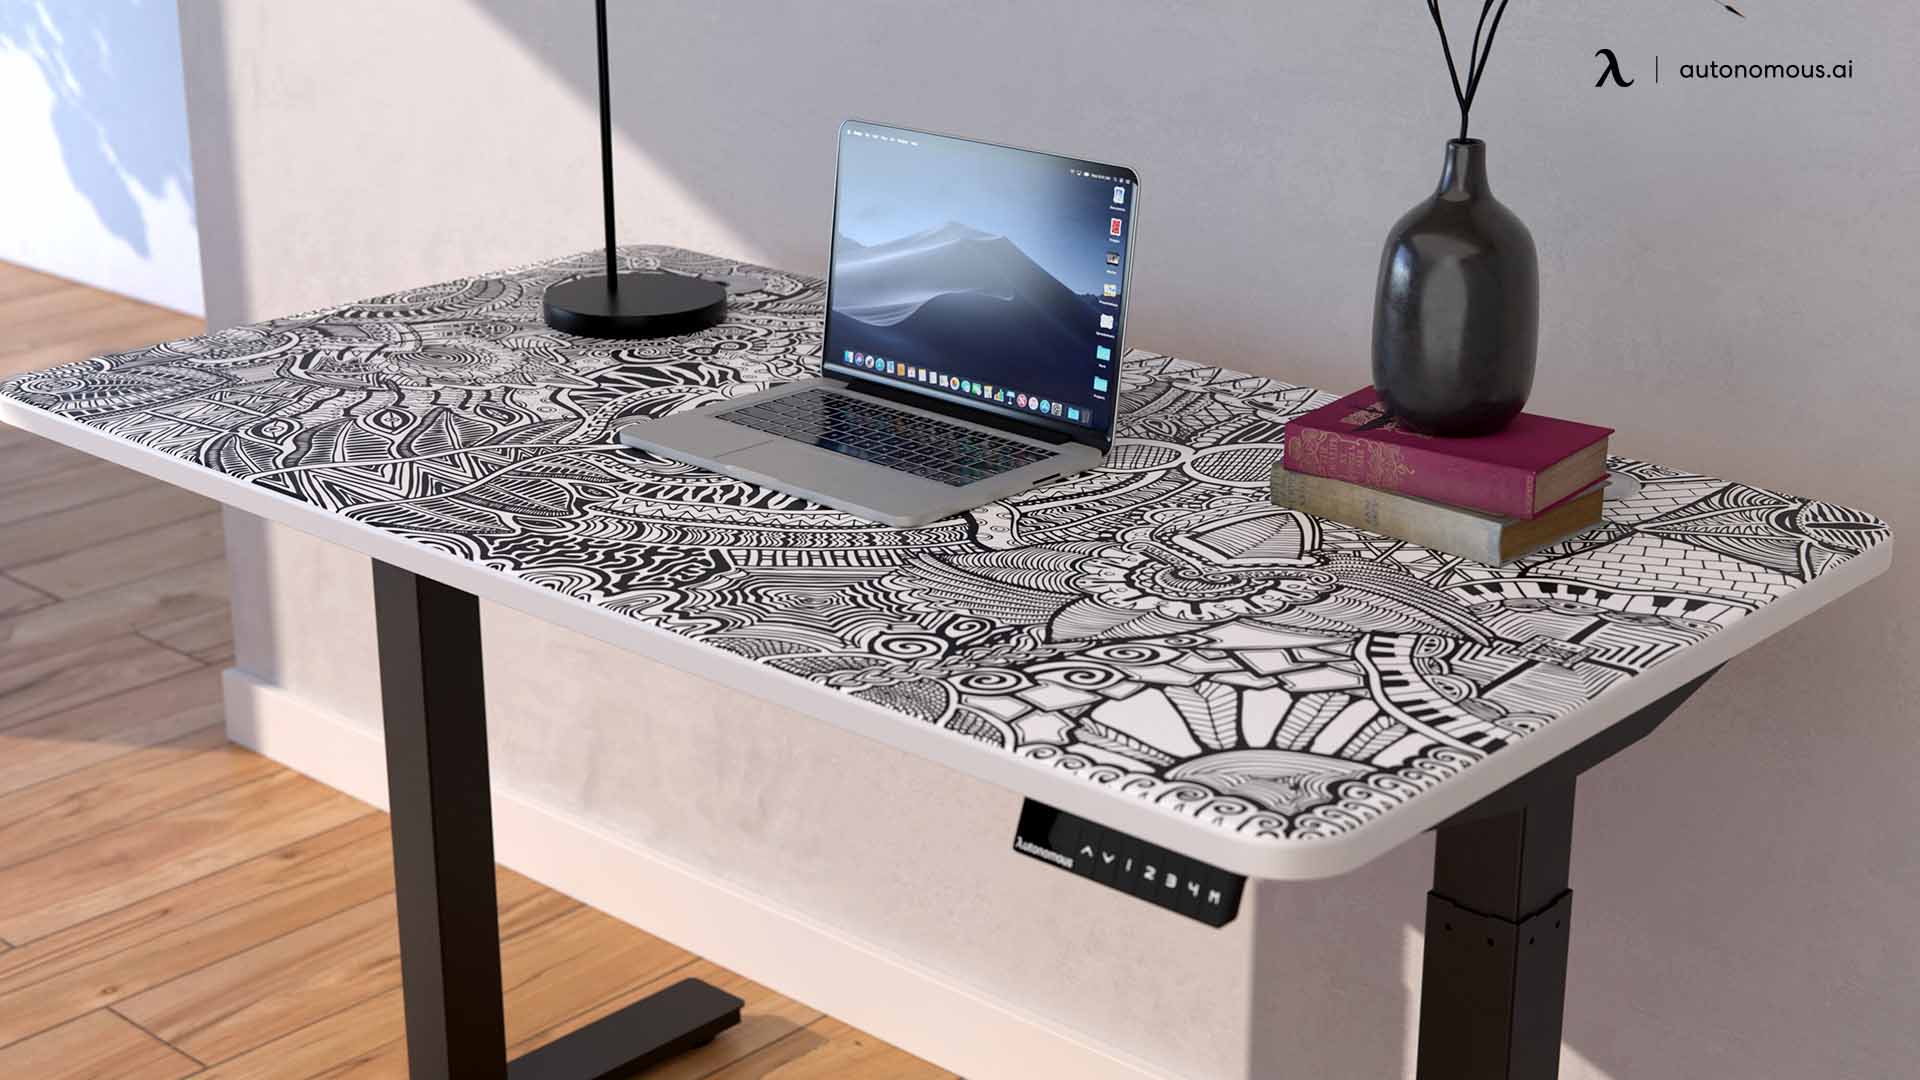 Take Time to Choose your New Desk